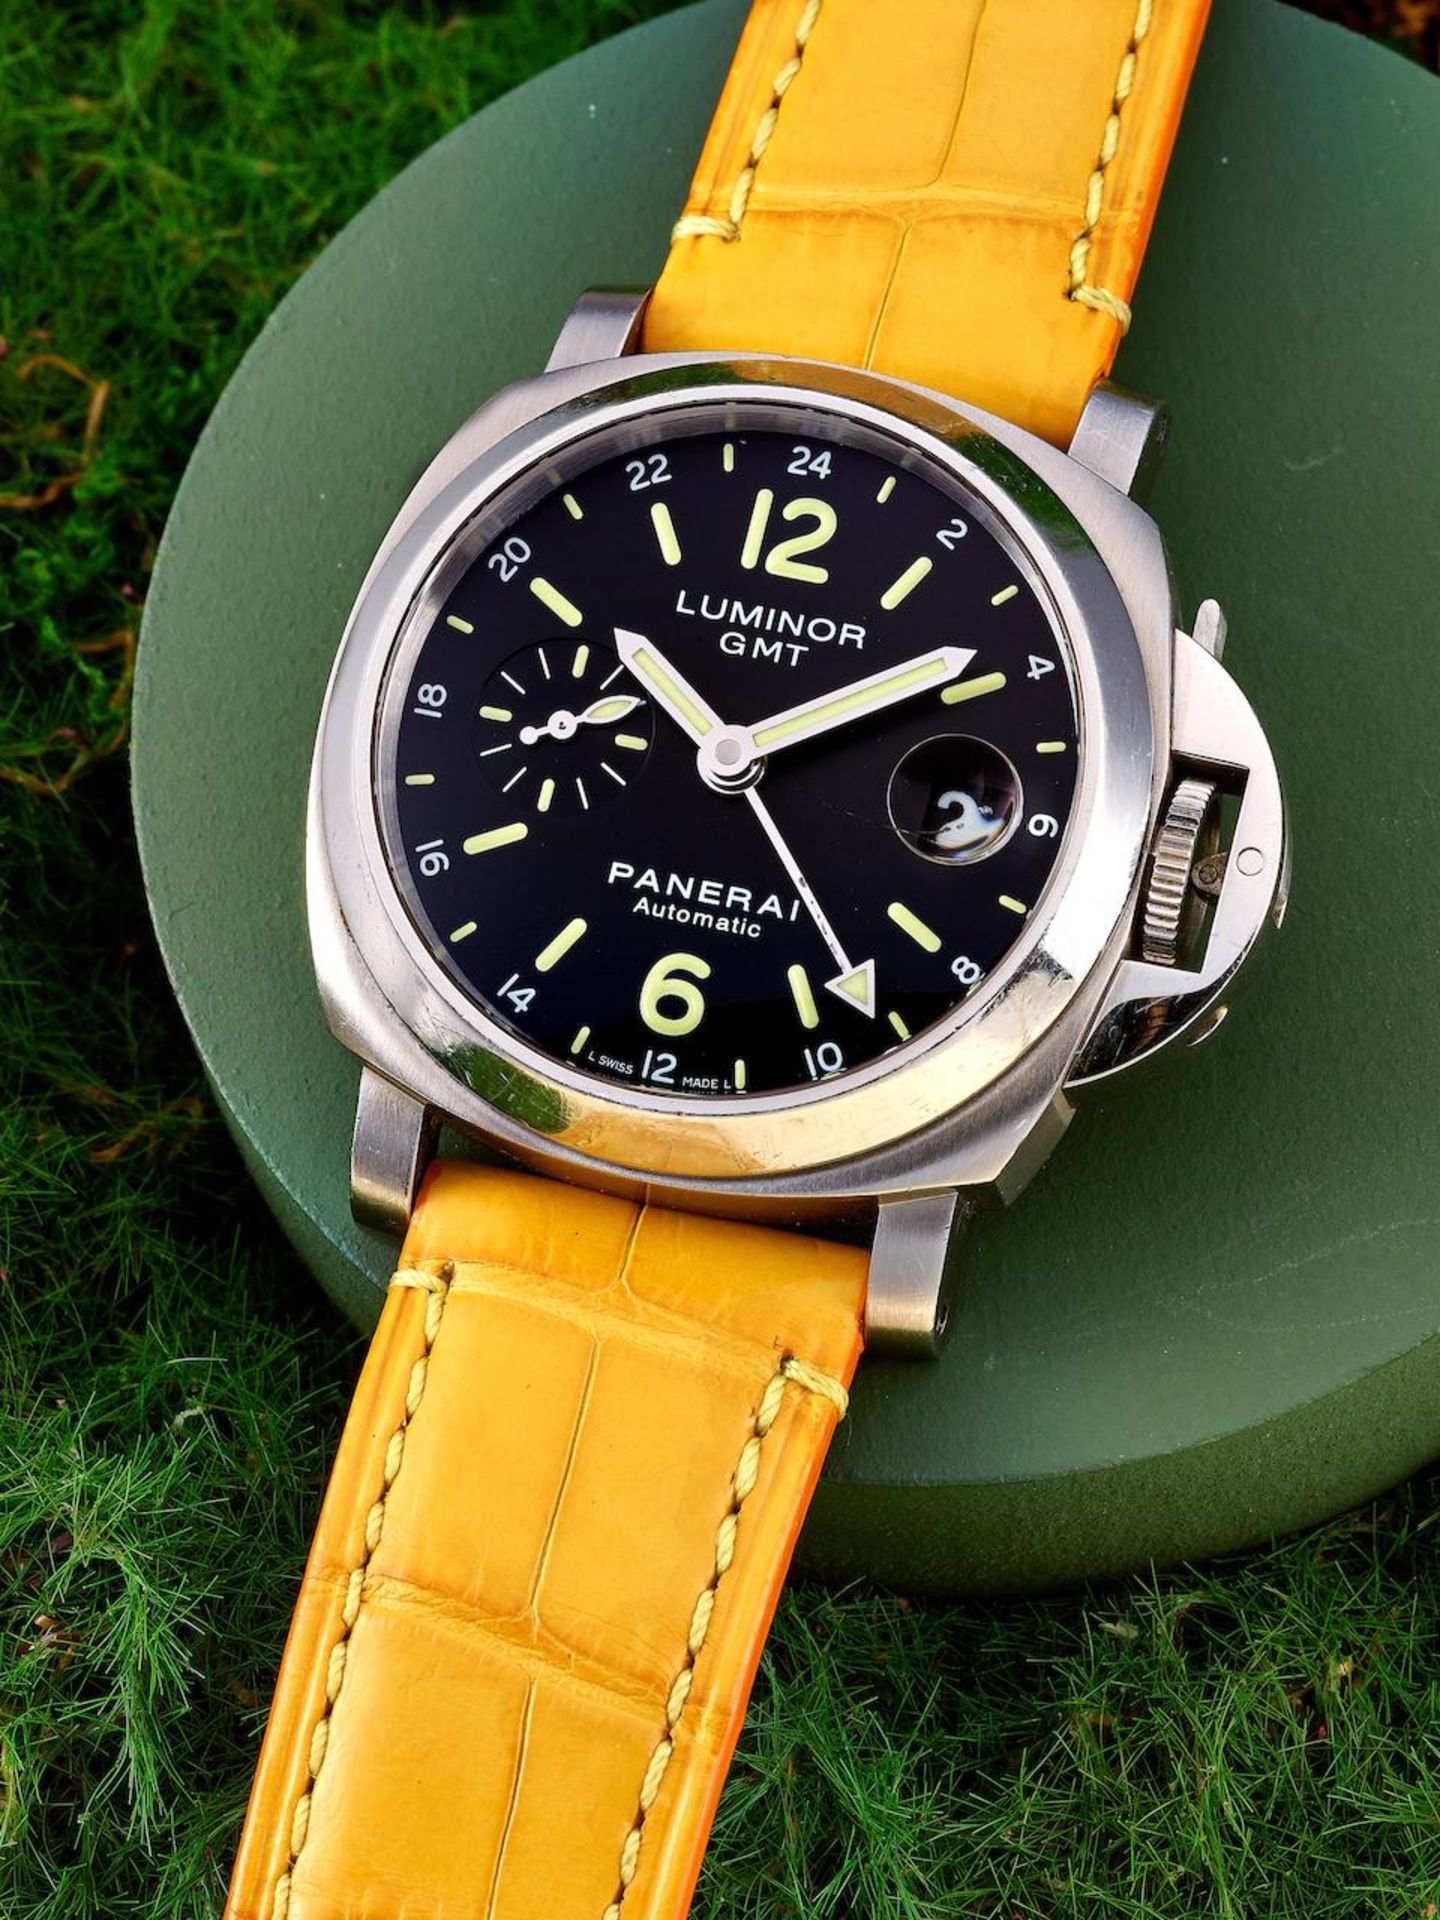 PANERAI | LUMINOR GMT, REF.PAM00244, A STAINLESS STEEL DUAL TIME WRISTWATCH WITH DATE, CIRCA 2010